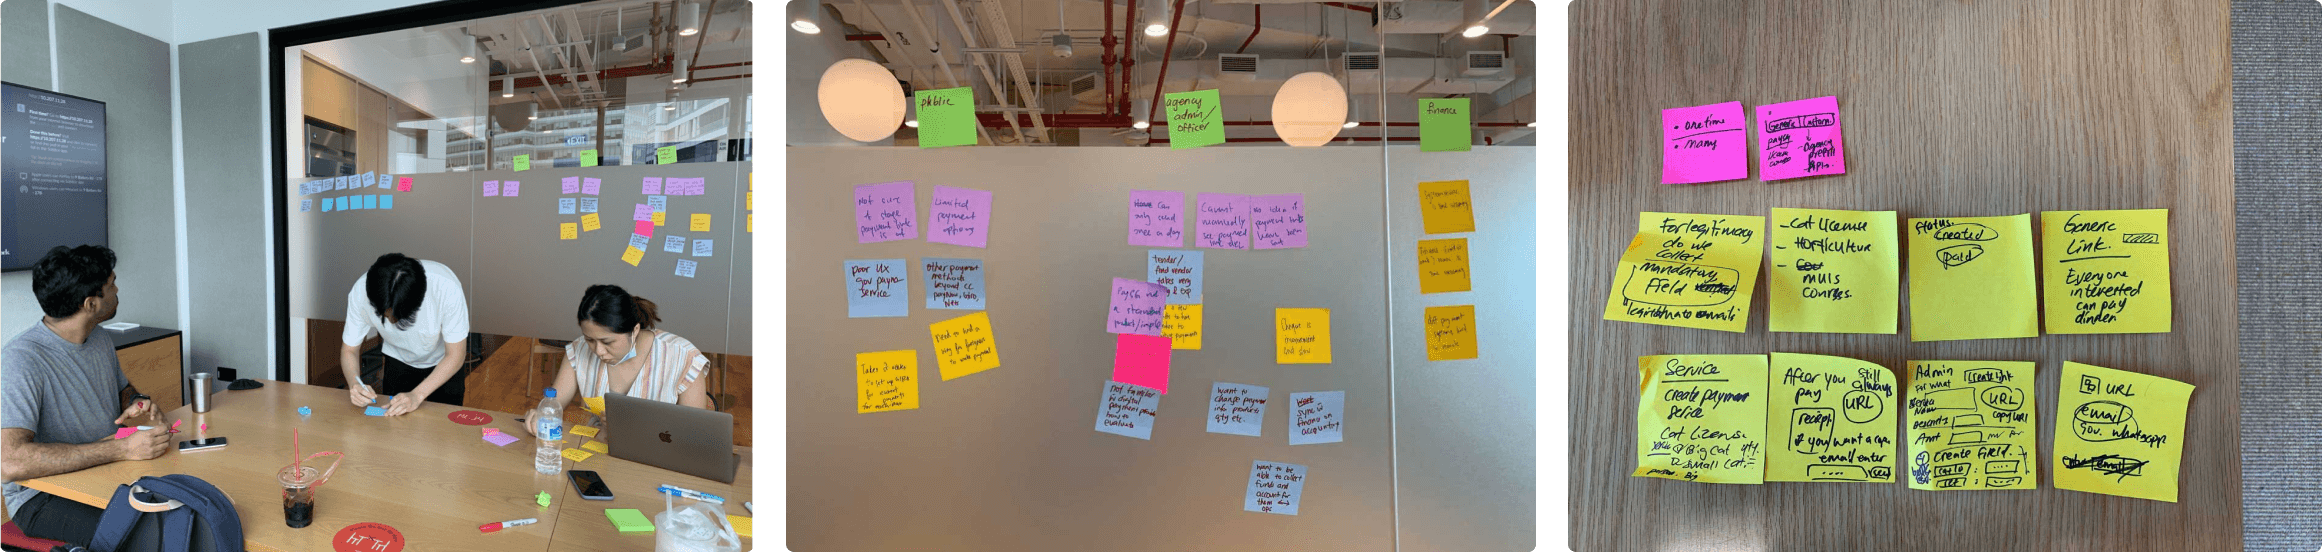 I ran a design thinking workshop for the team to plan the long term vision